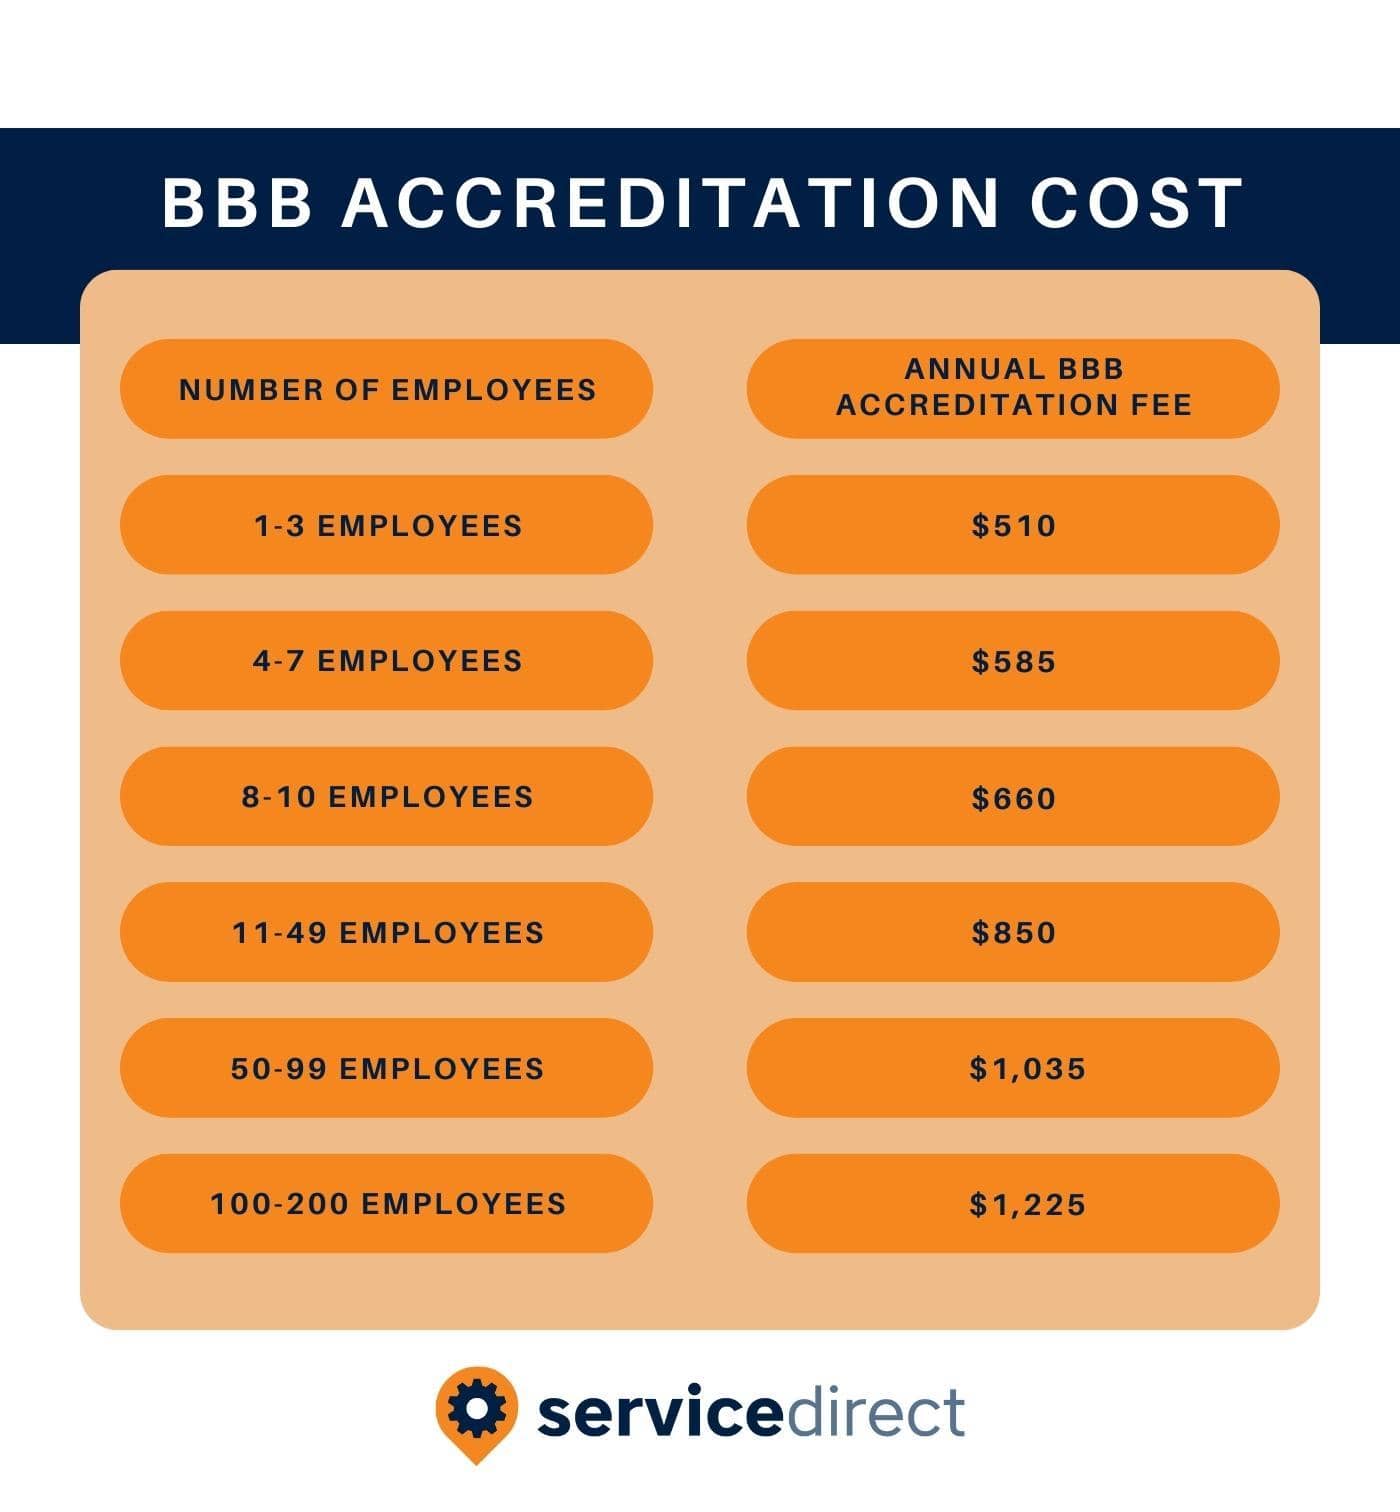 BBB ACCREDITATION DUES CHART